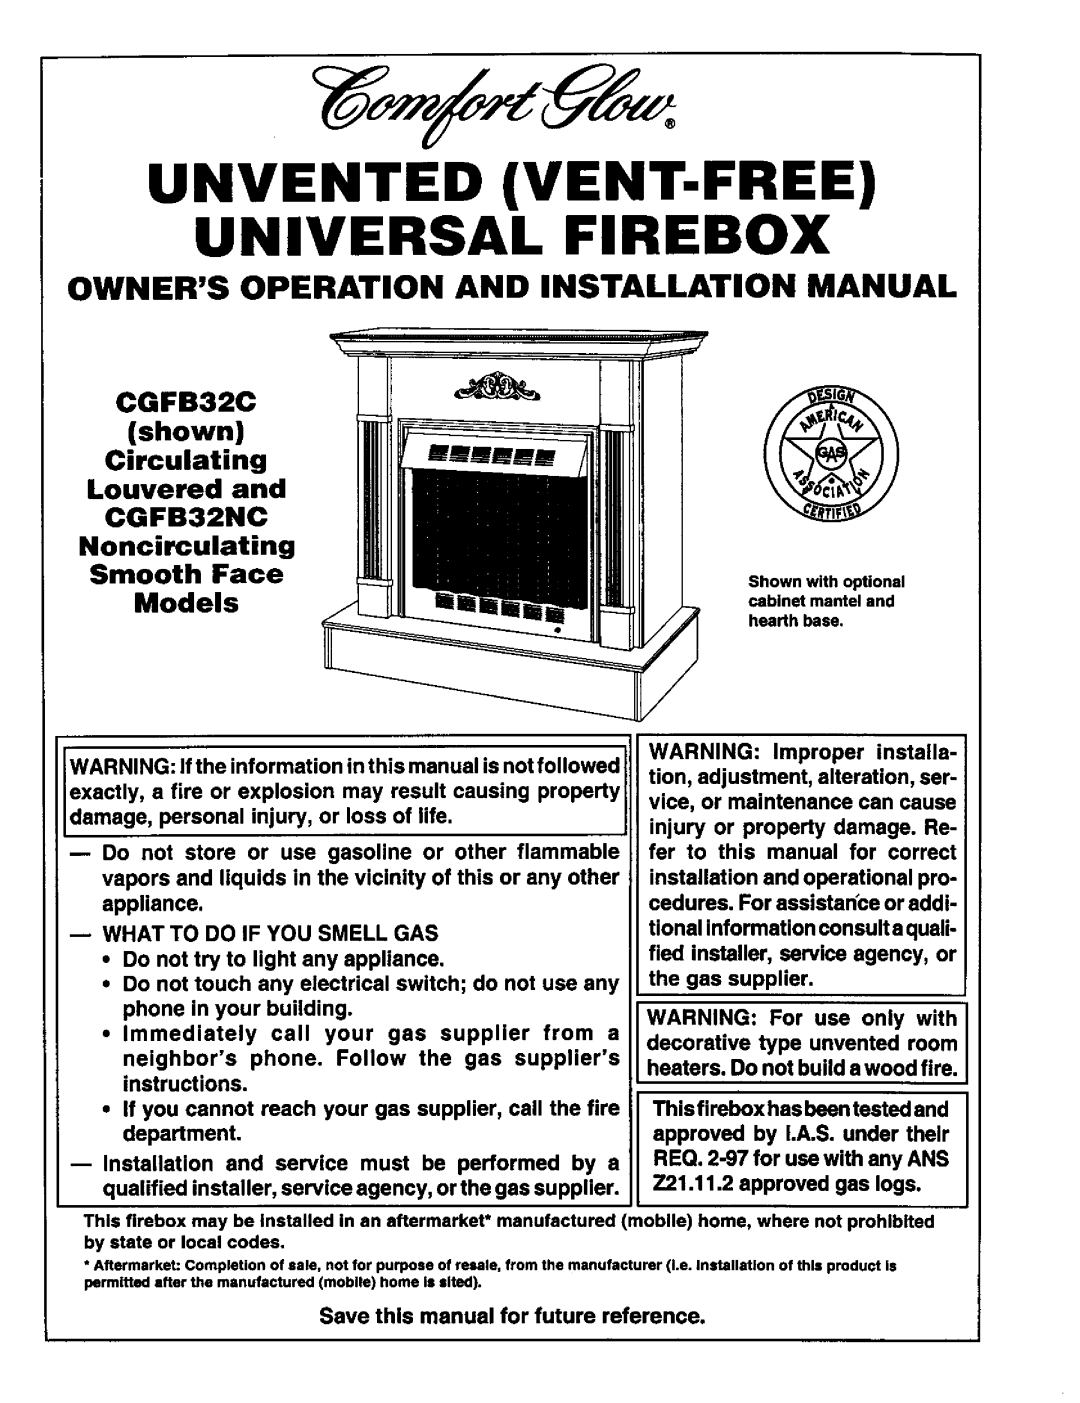 Desa Tech CGFB32C installation manual Unvented Vent-Free Universal Firebox, Owners Operation And Installation Manual, Face 